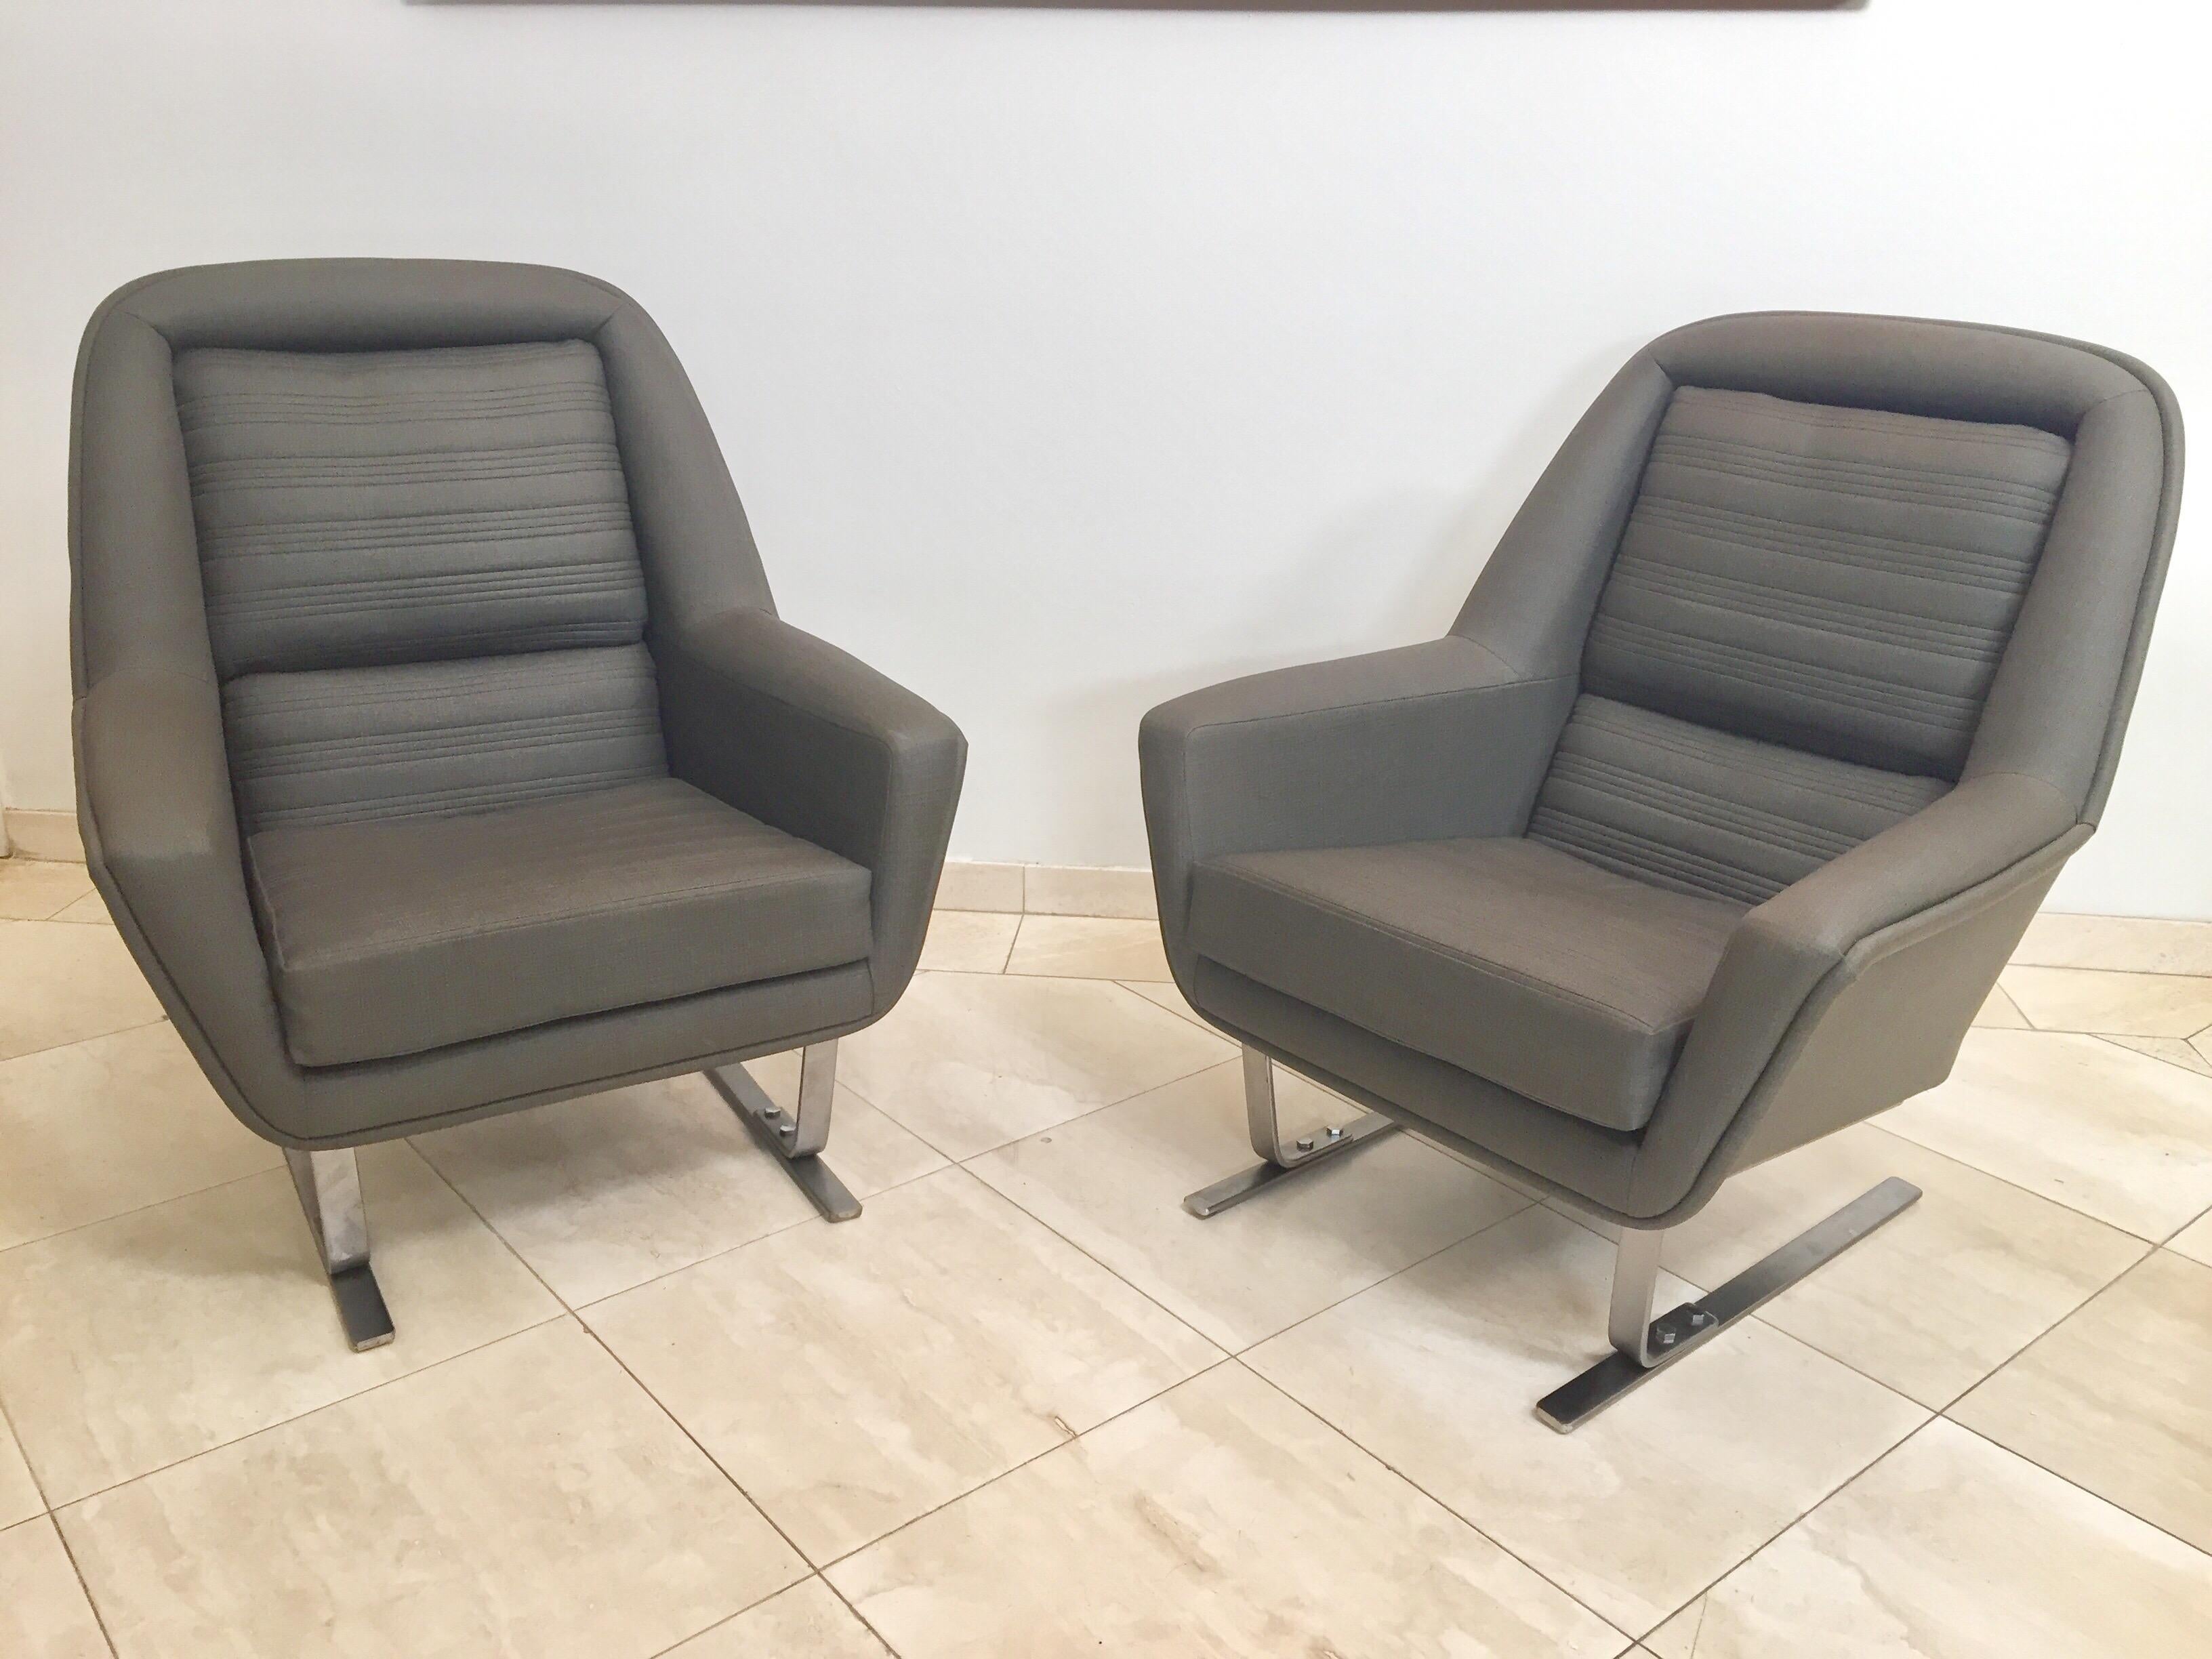 Augusto Bozzi Pair of Modernist Cantilever Club Lounge Chair 1970 In Good Condition For Sale In North Hollywood, CA